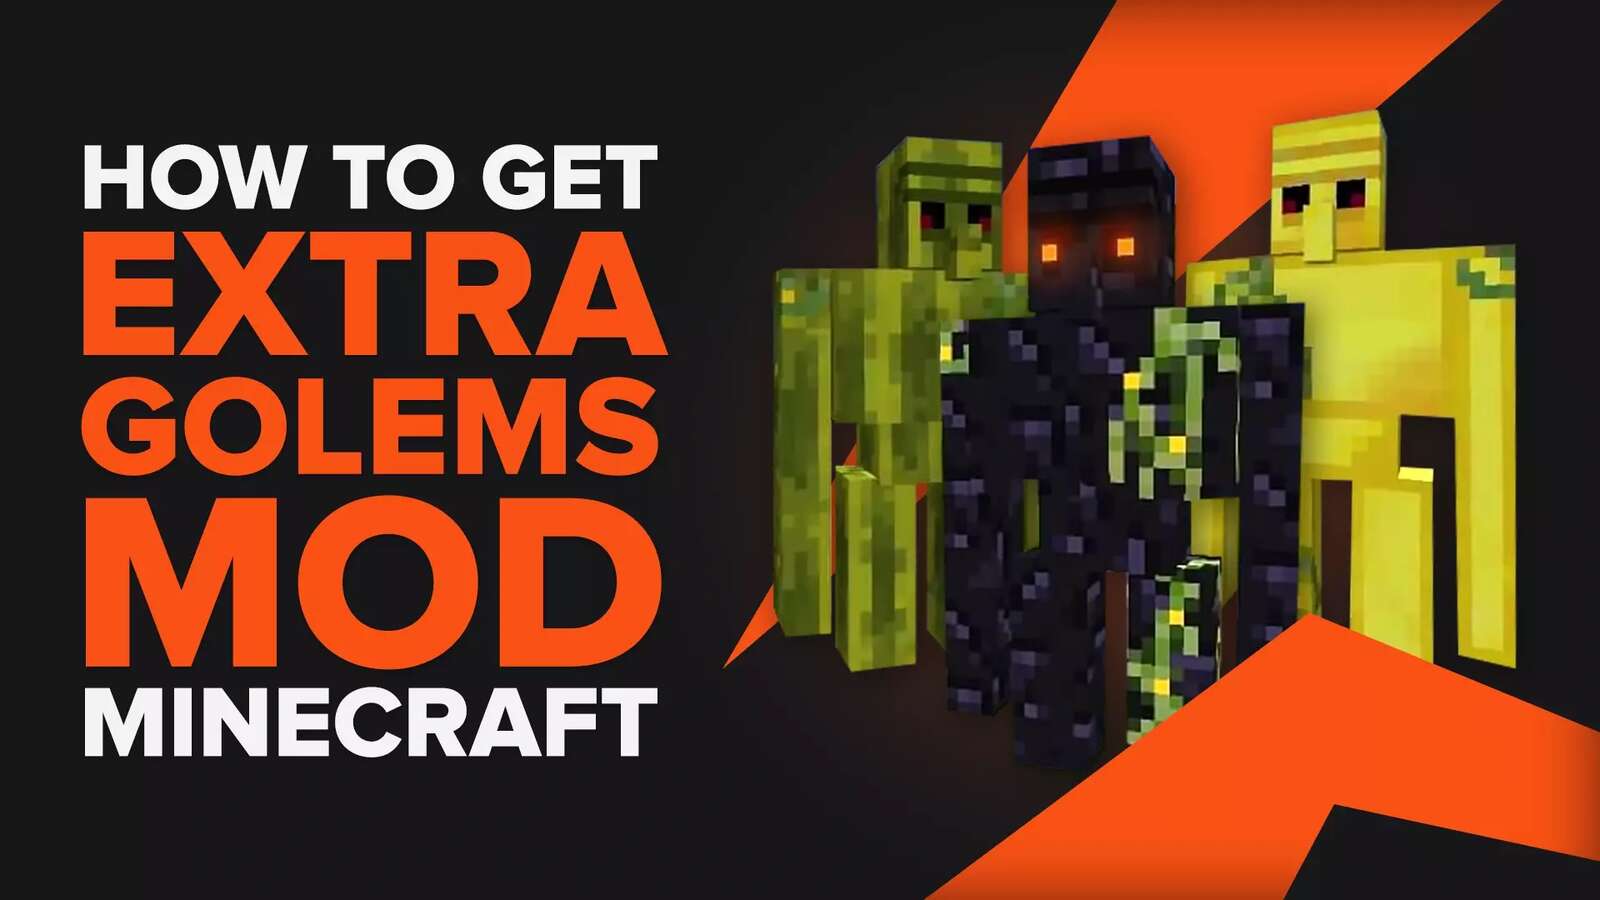 Easily Download & Use the Extra Golems Mod in Minecraft